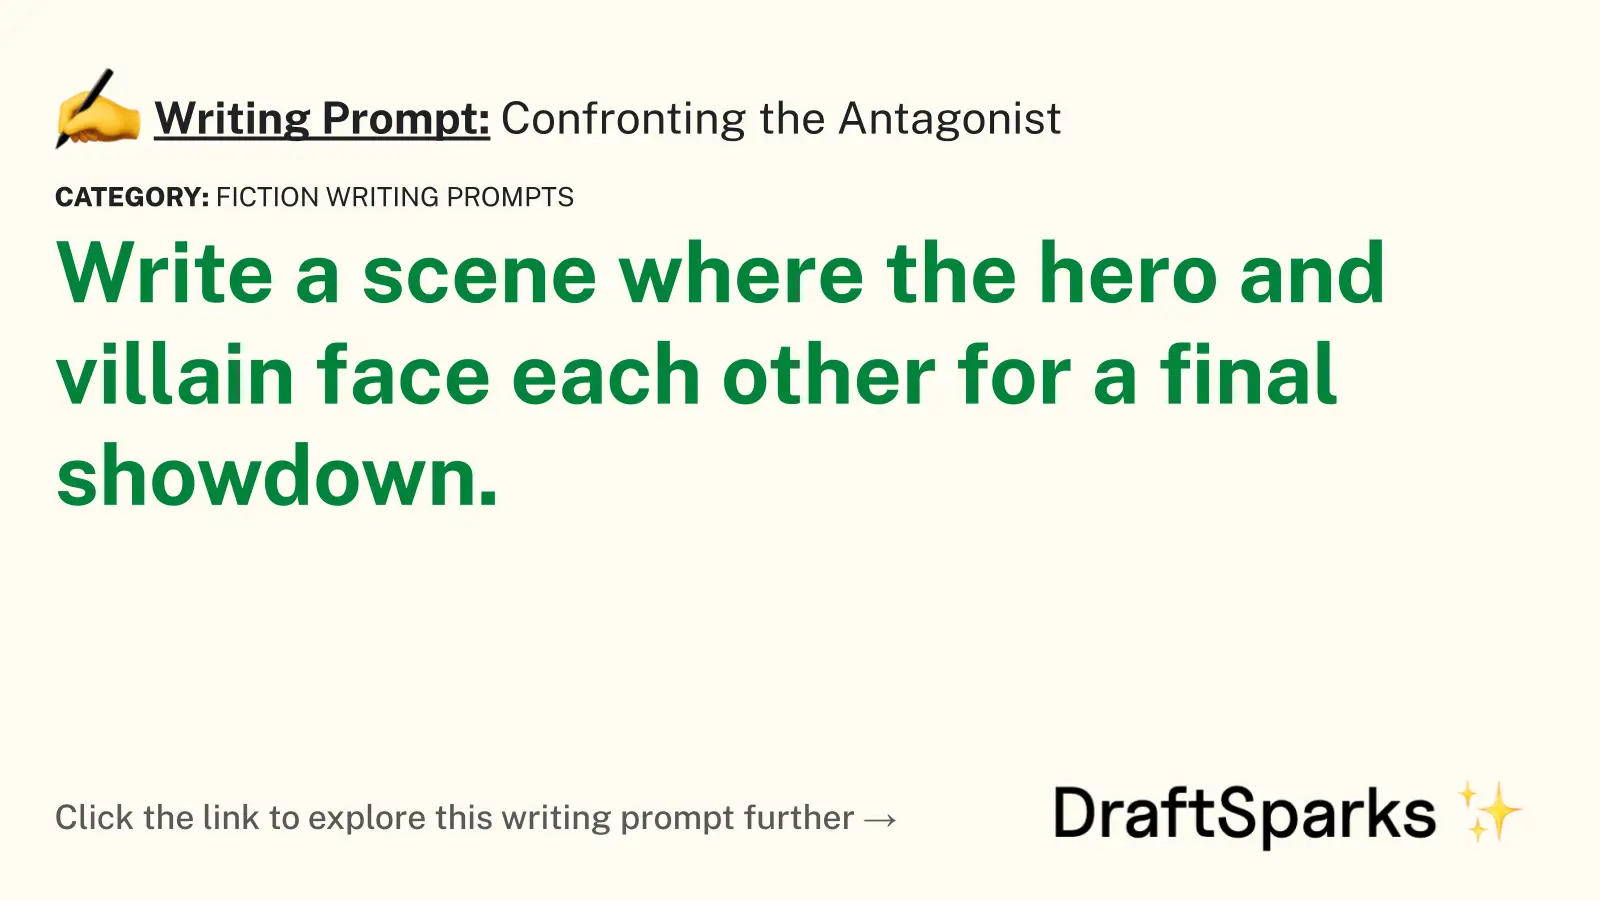 Confronting the Antagonist